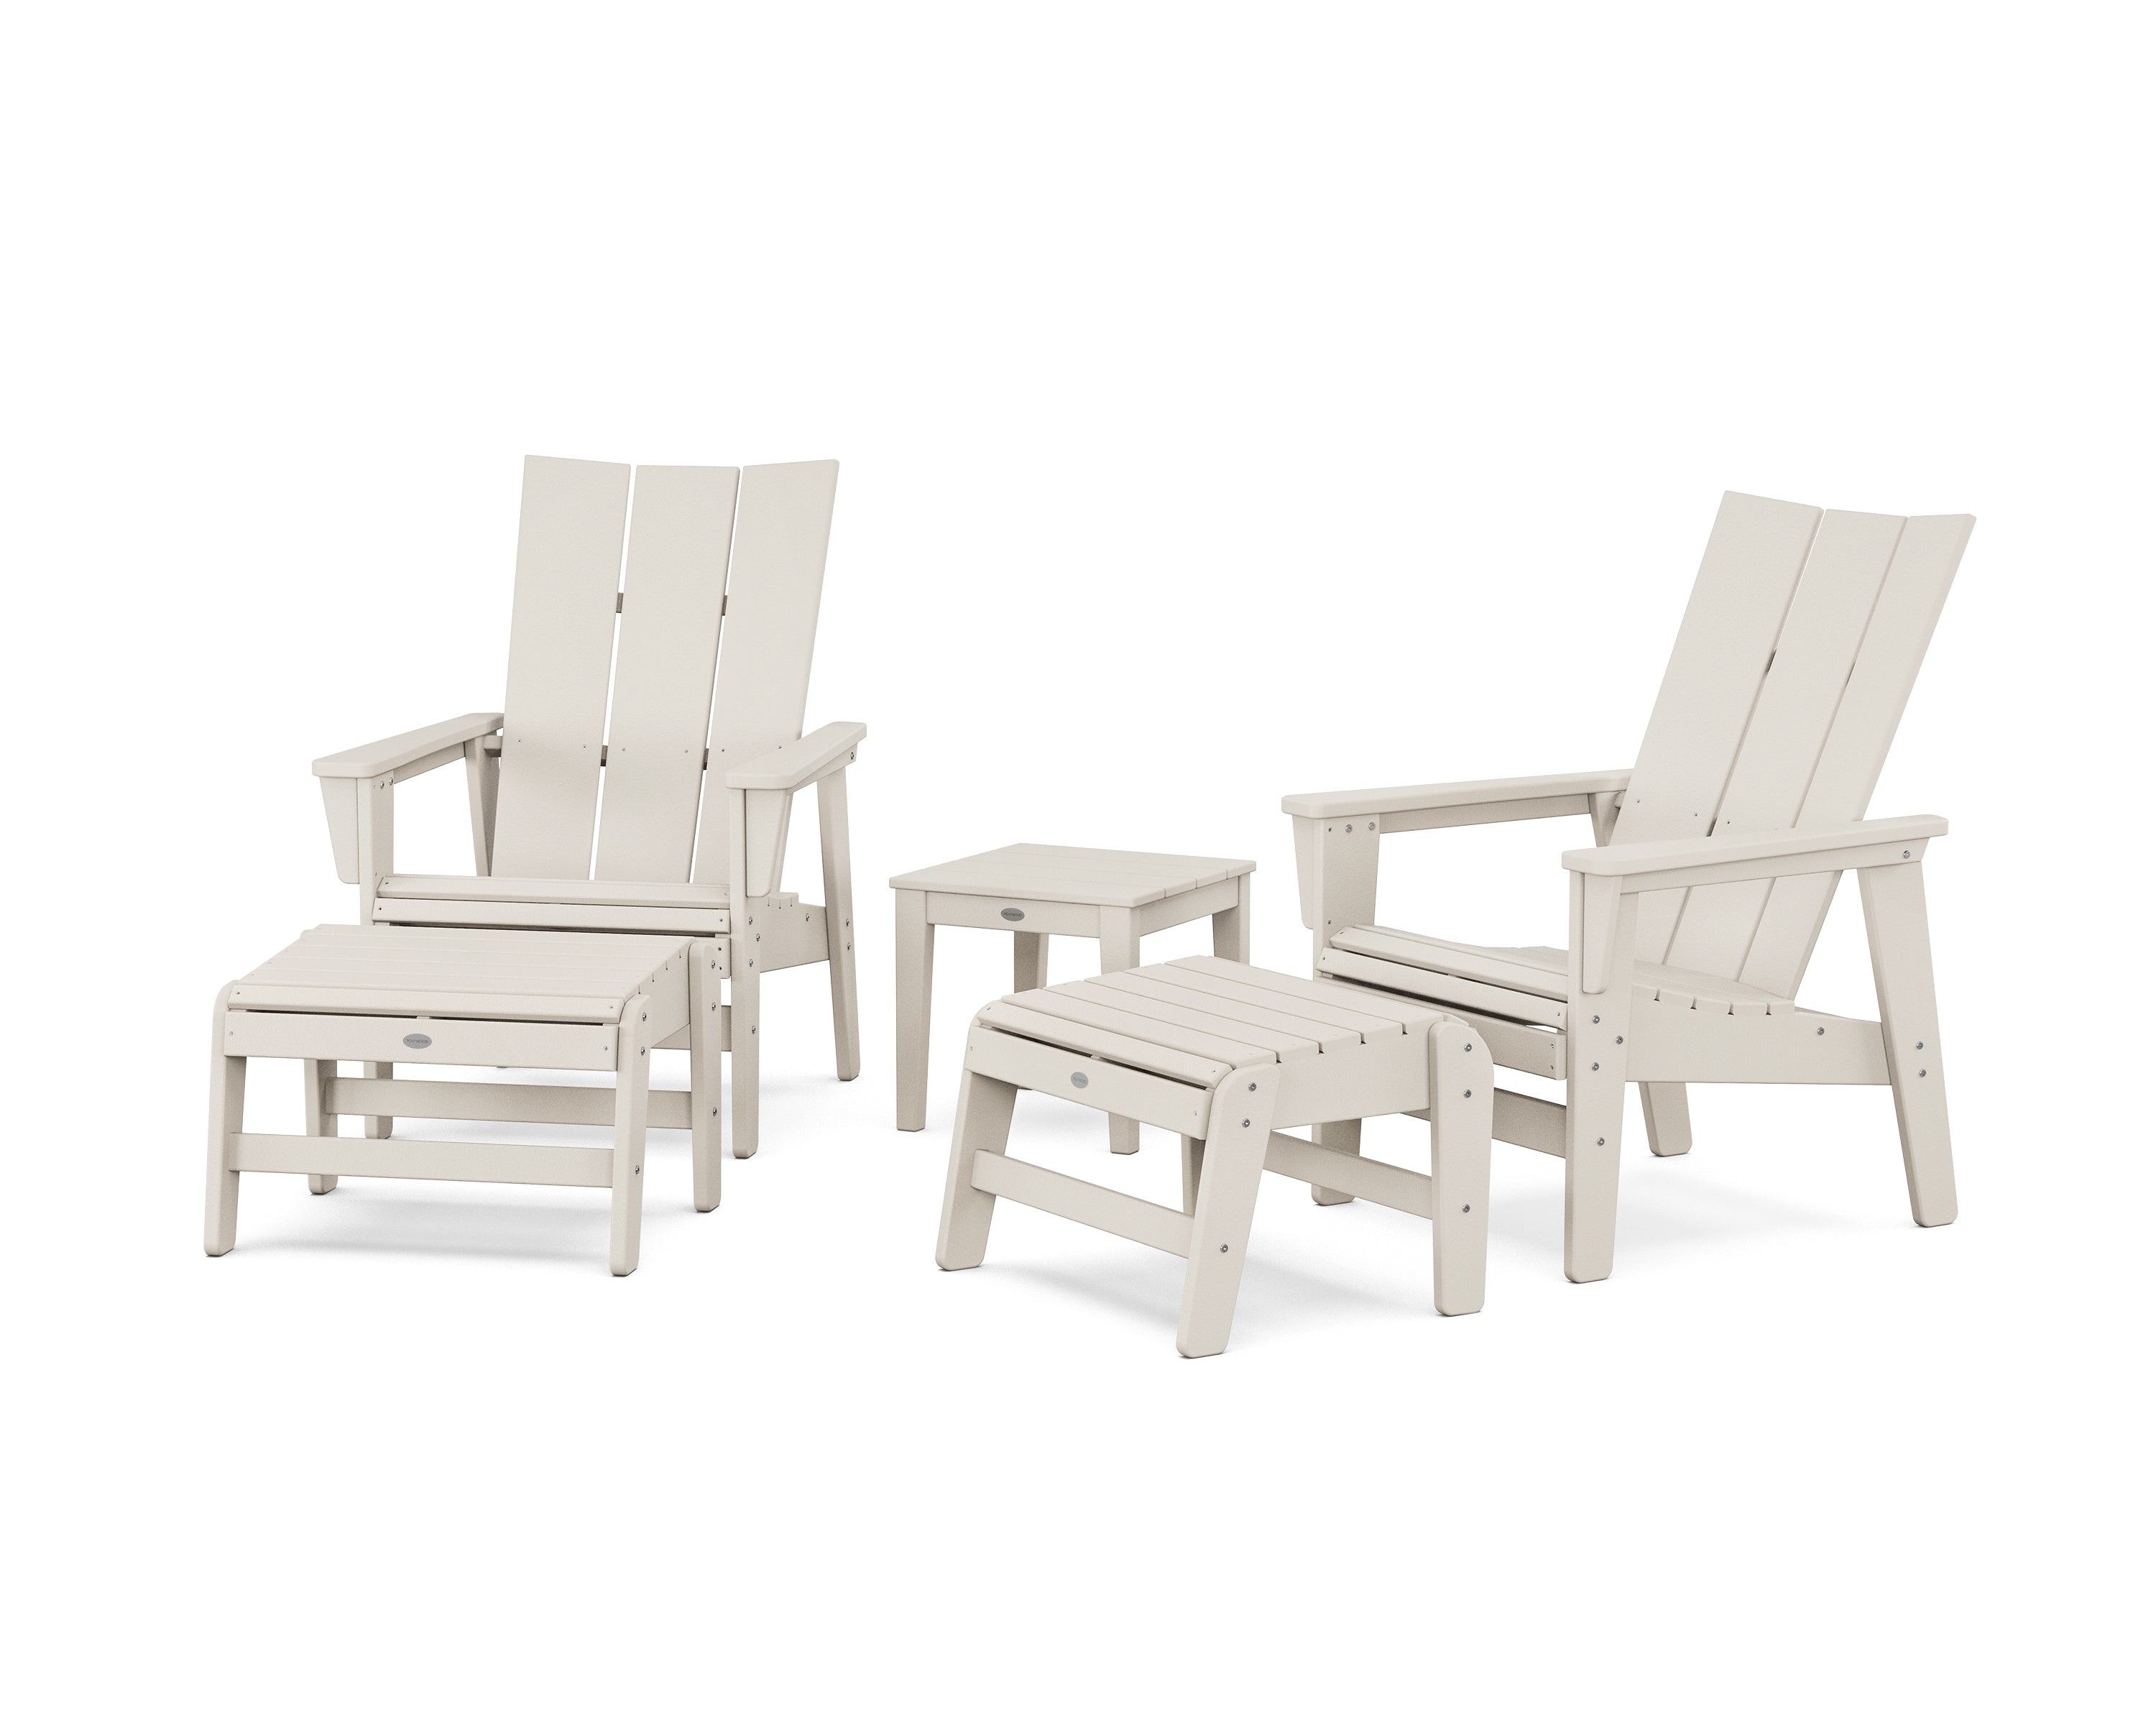 POLYWOOD® 5-Piece Modern Grand Upright Adirondack Set with Ottomans and Side Table in Sand